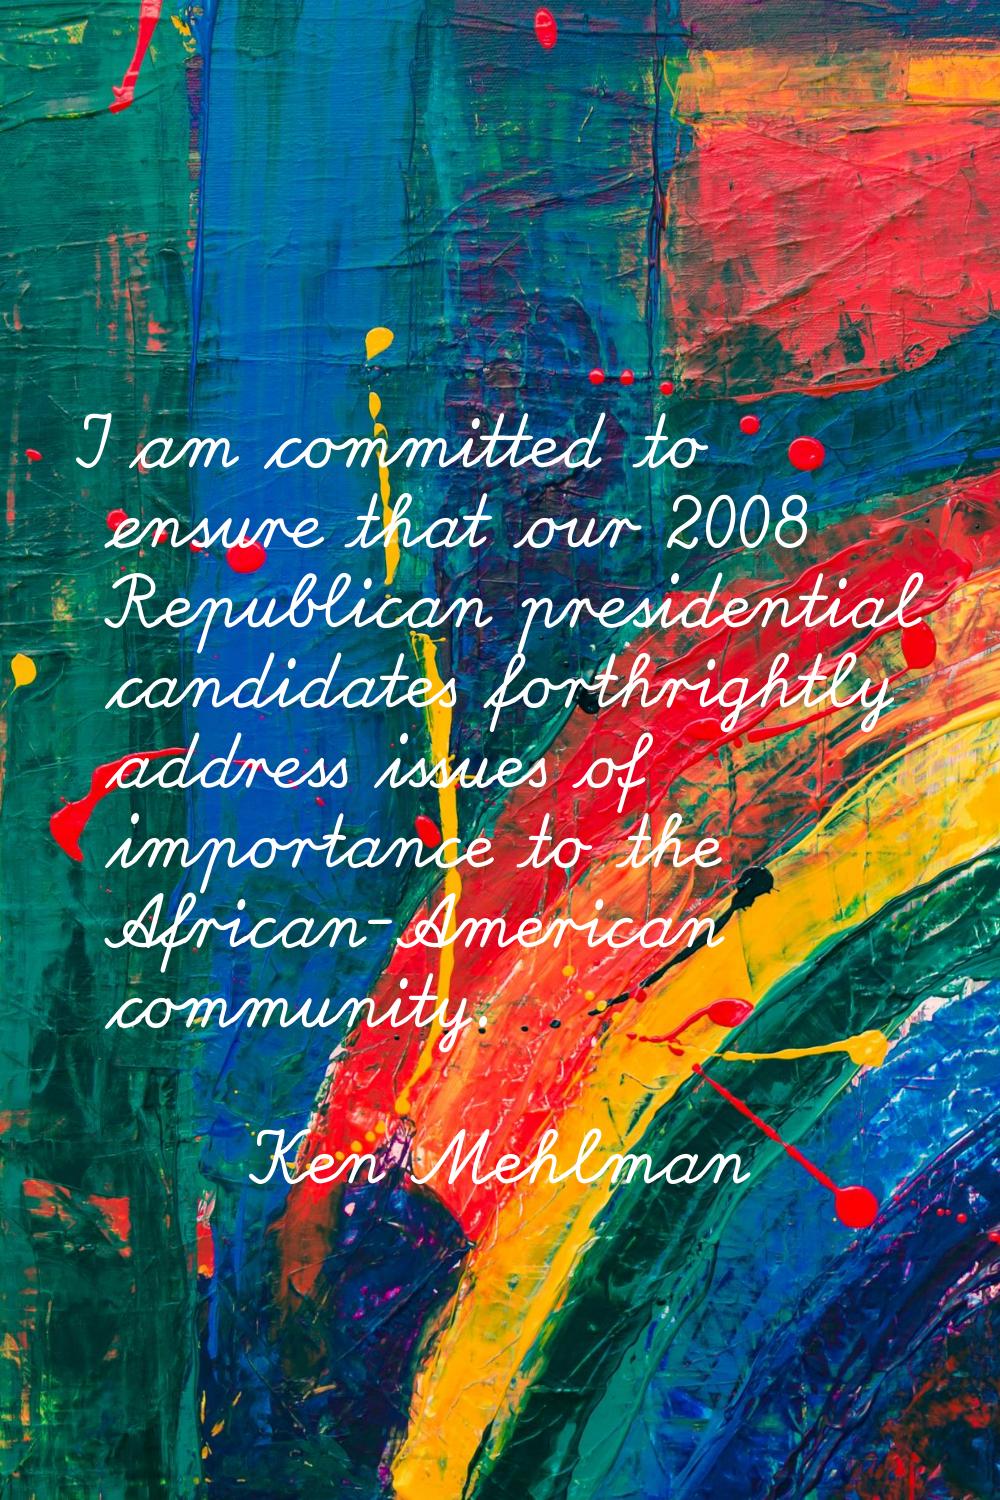 I am committed to ensure that our 2008 Republican presidential candidates forthrightly address issu